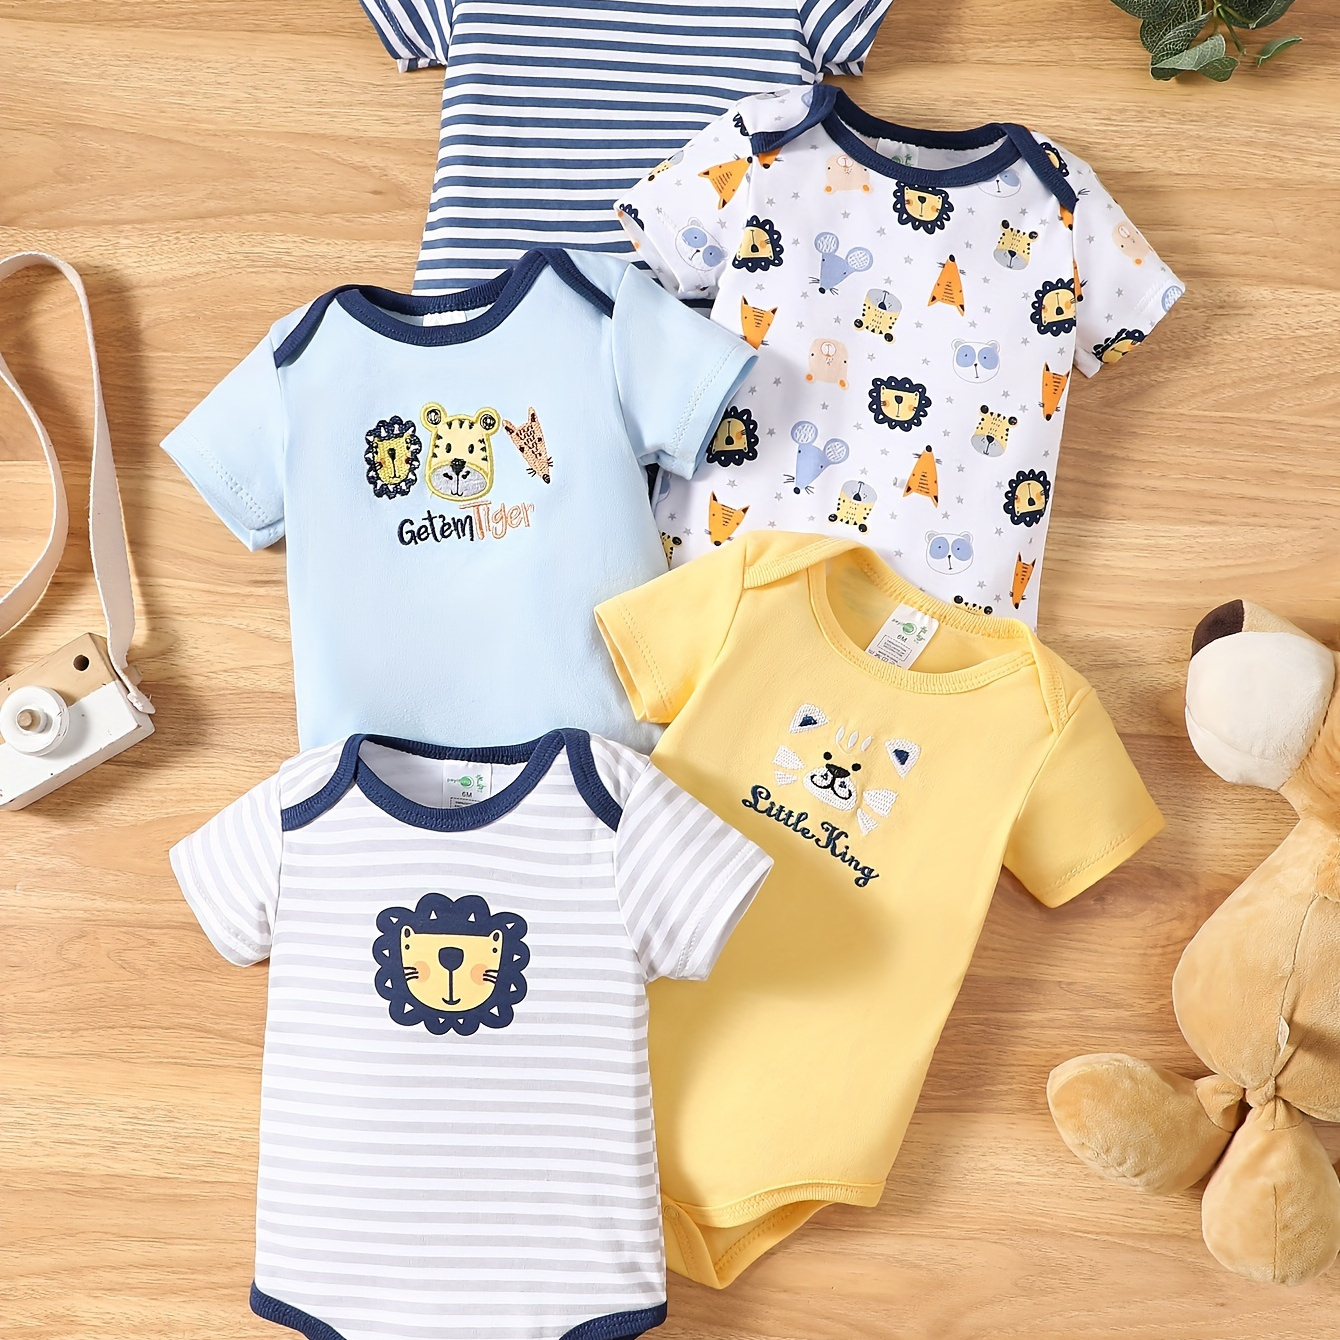 

5-pack Baby Girls Boys Pure Cotton Bodysuits, Cute Animal Lion Pattern, Short Onesies In Light Color Tones, Comfortable Snapsuit Set For Infants